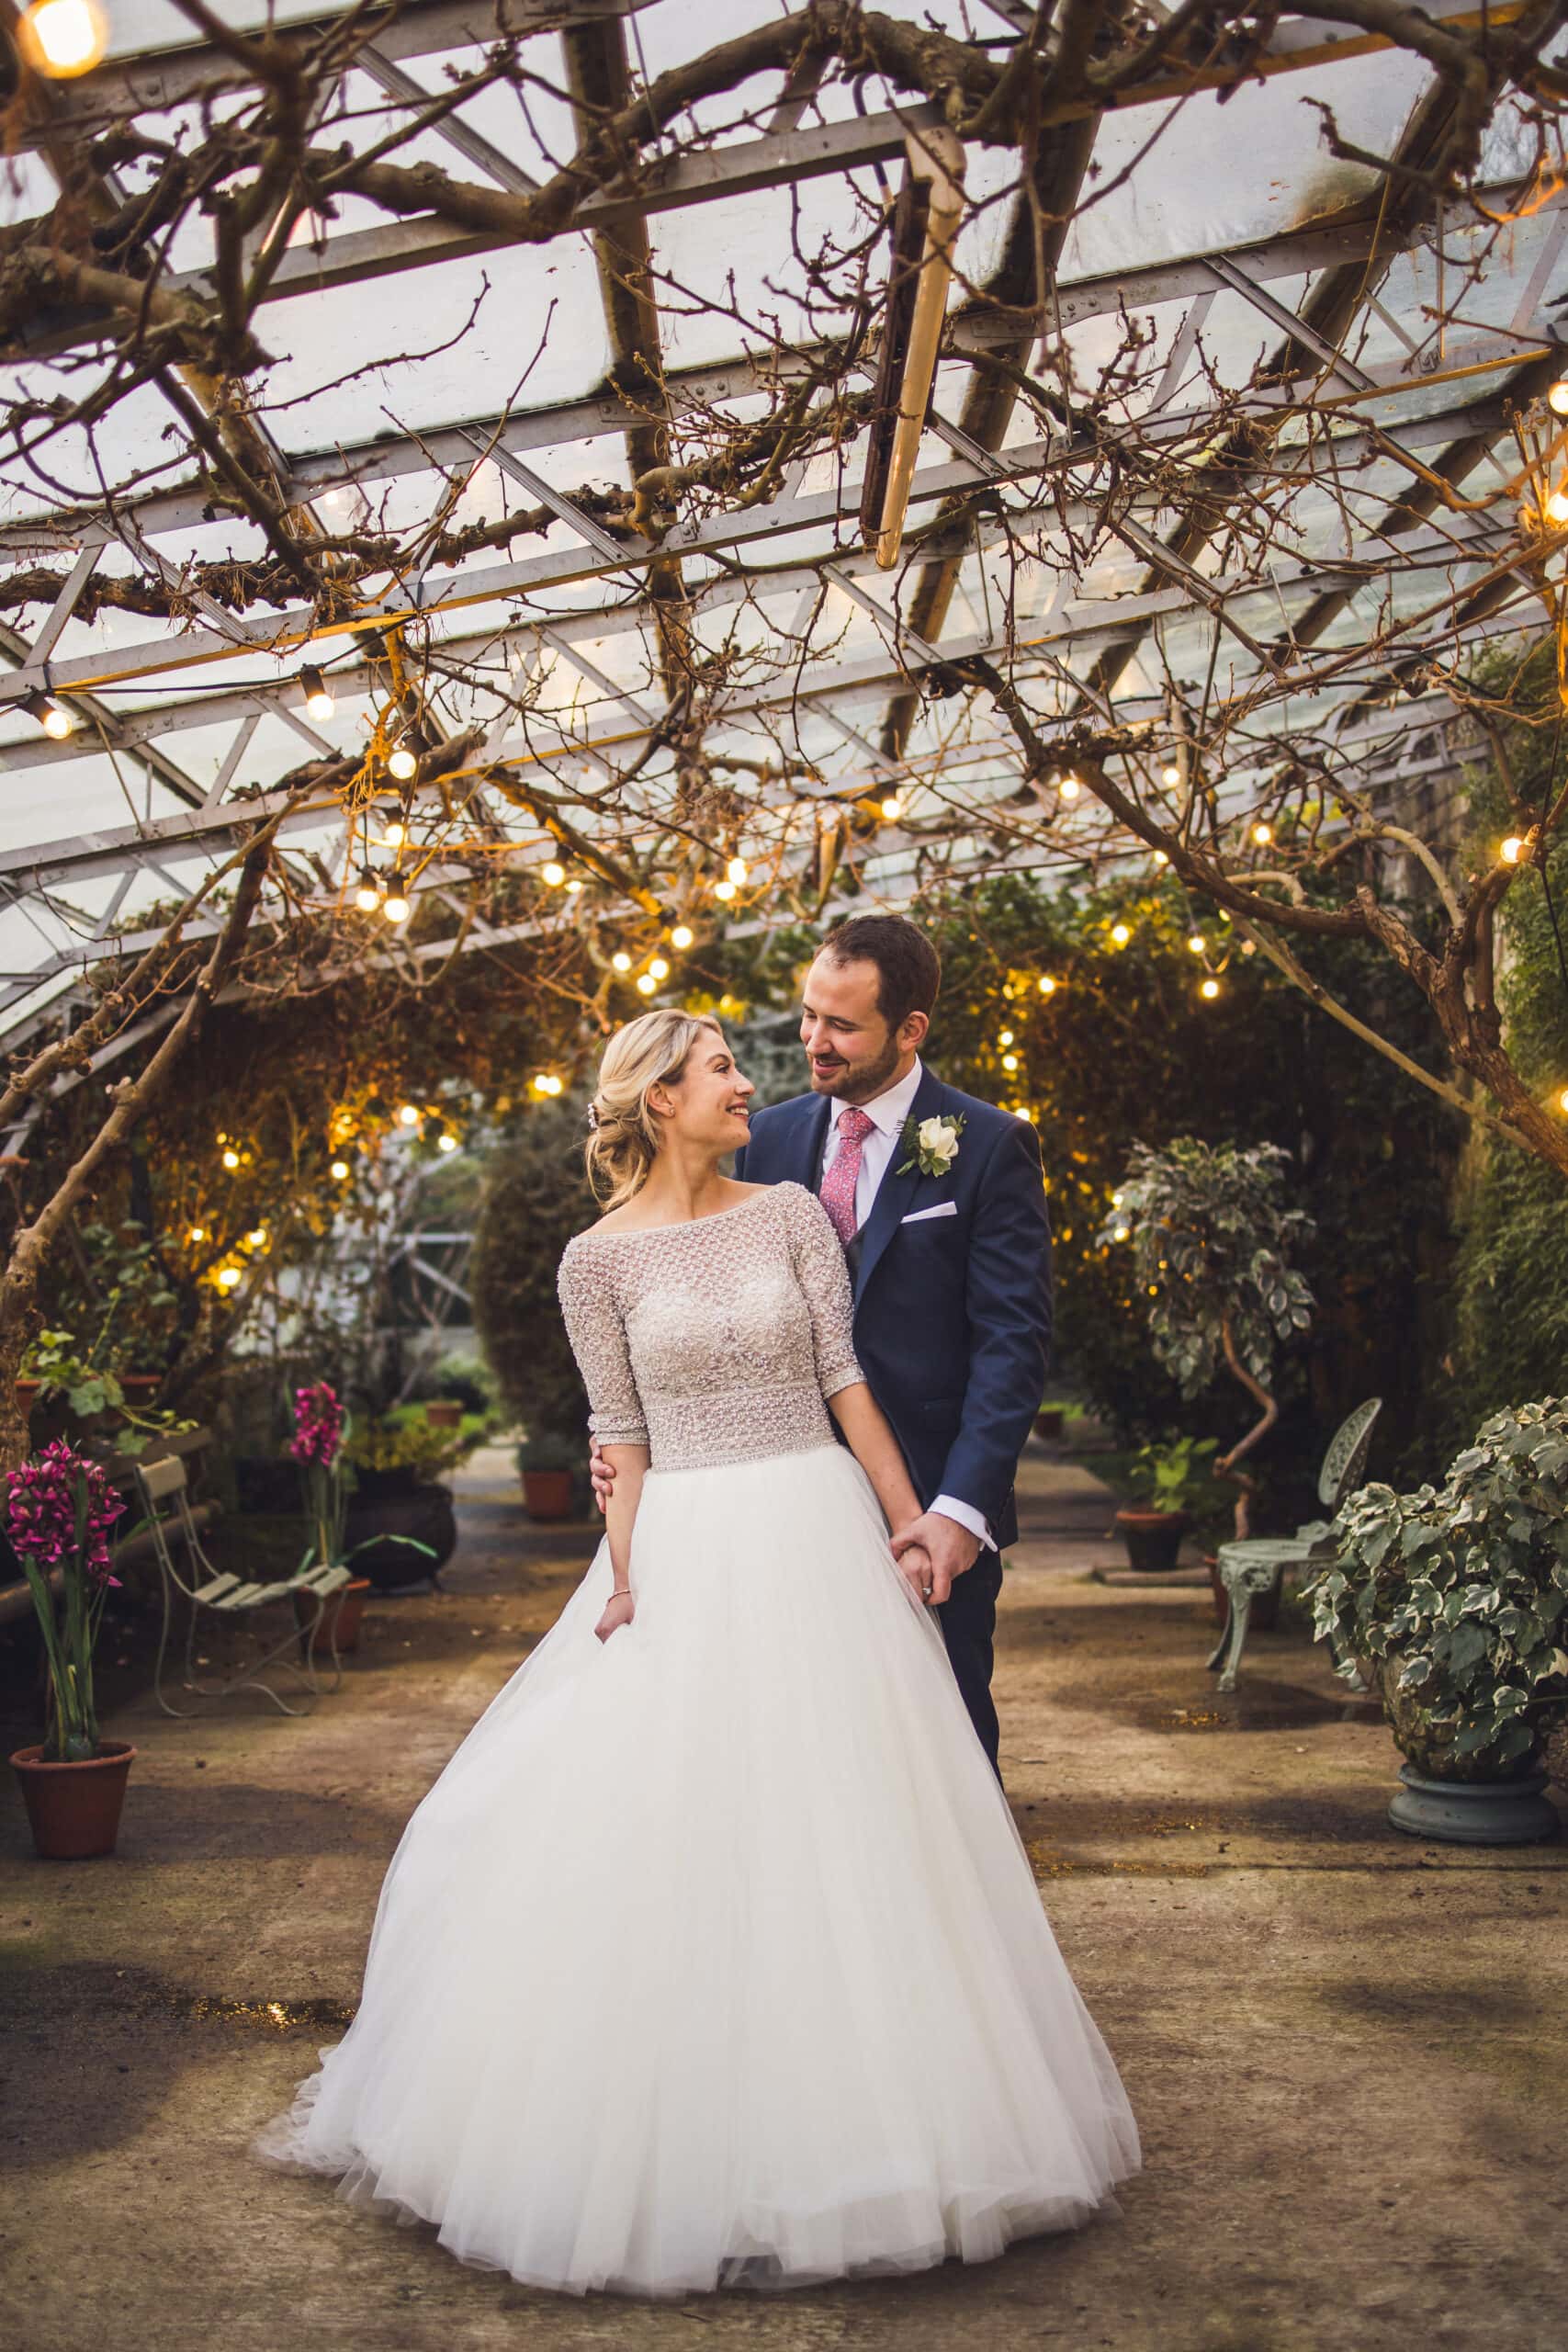 A stunning bride and groom glow amidst the enchanting lights of a magical greenhouse at Larchfield